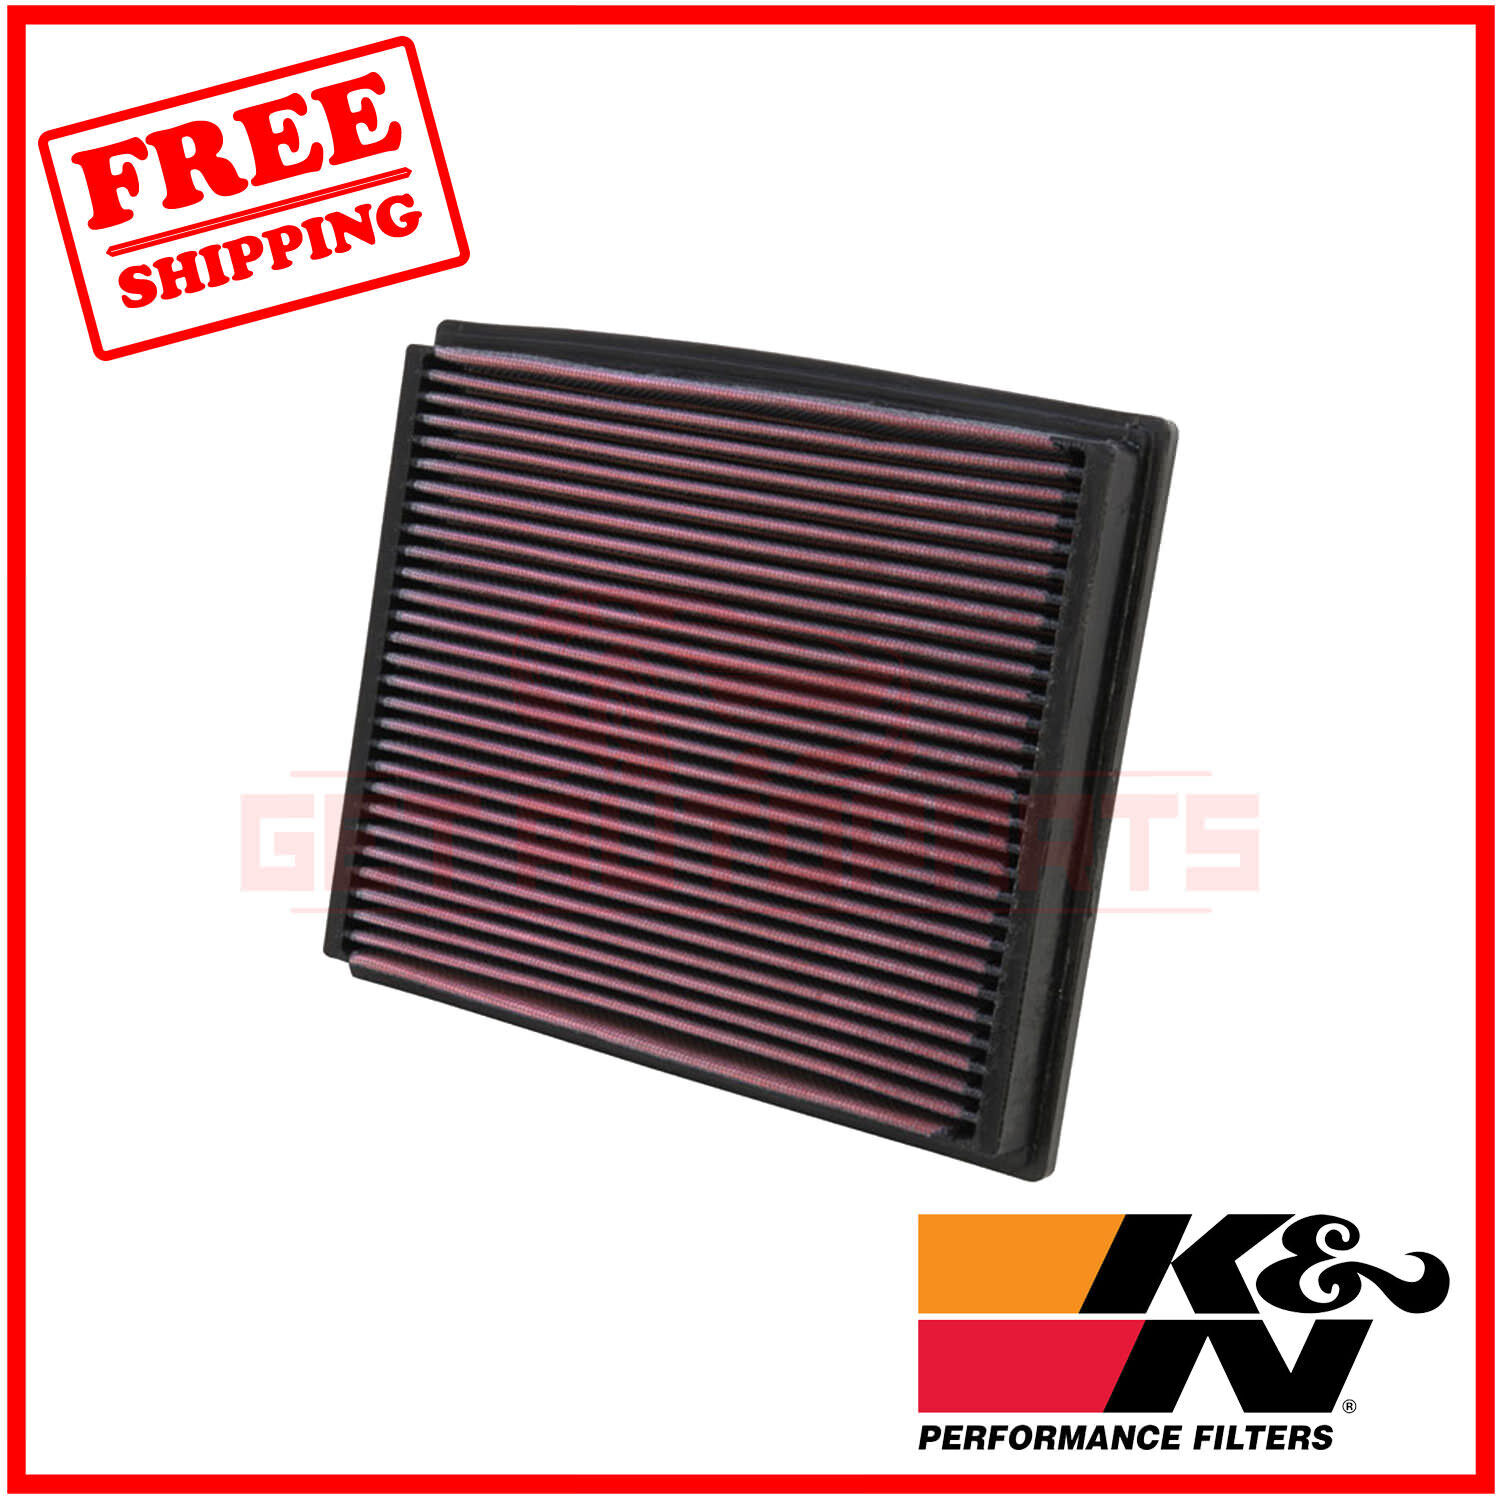 K&N Replacement Air Filter for Audi Allroad Quattro 2001-2005